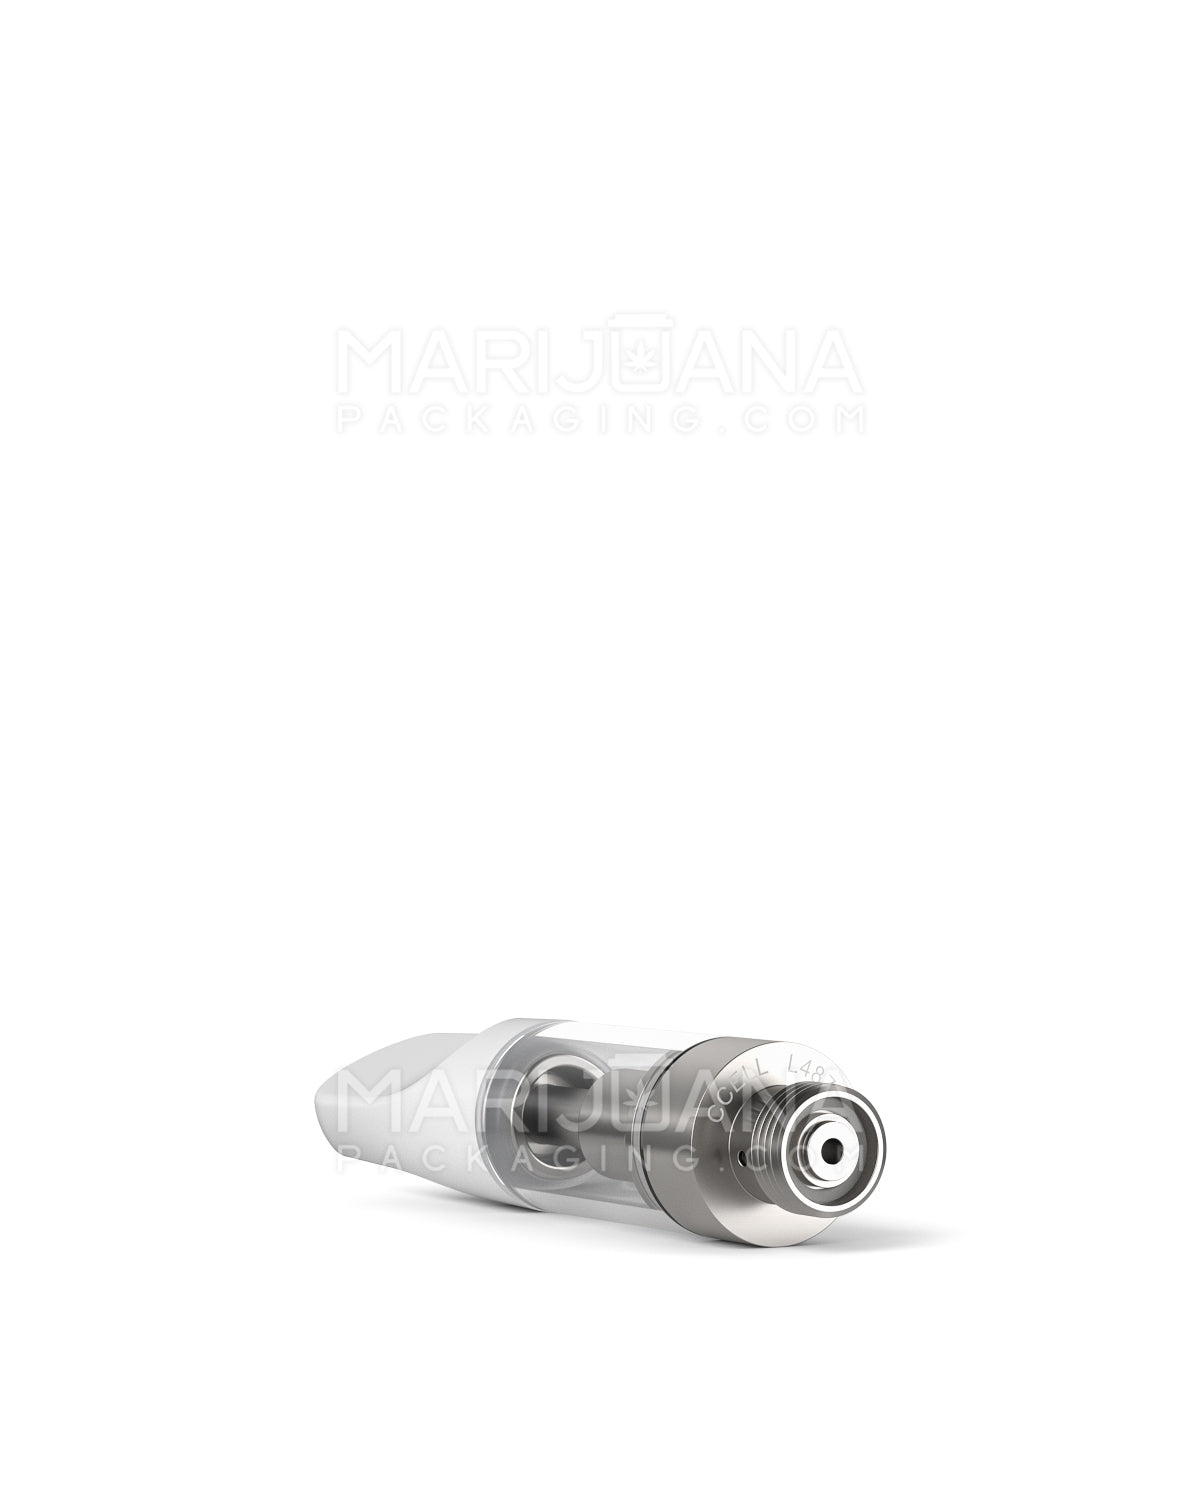 CCELL | Liquid6 Reactor Glass Vape Cartridge with White Plastic Mouthpiece | 0.5mL - Screw On - 100 Count - 7